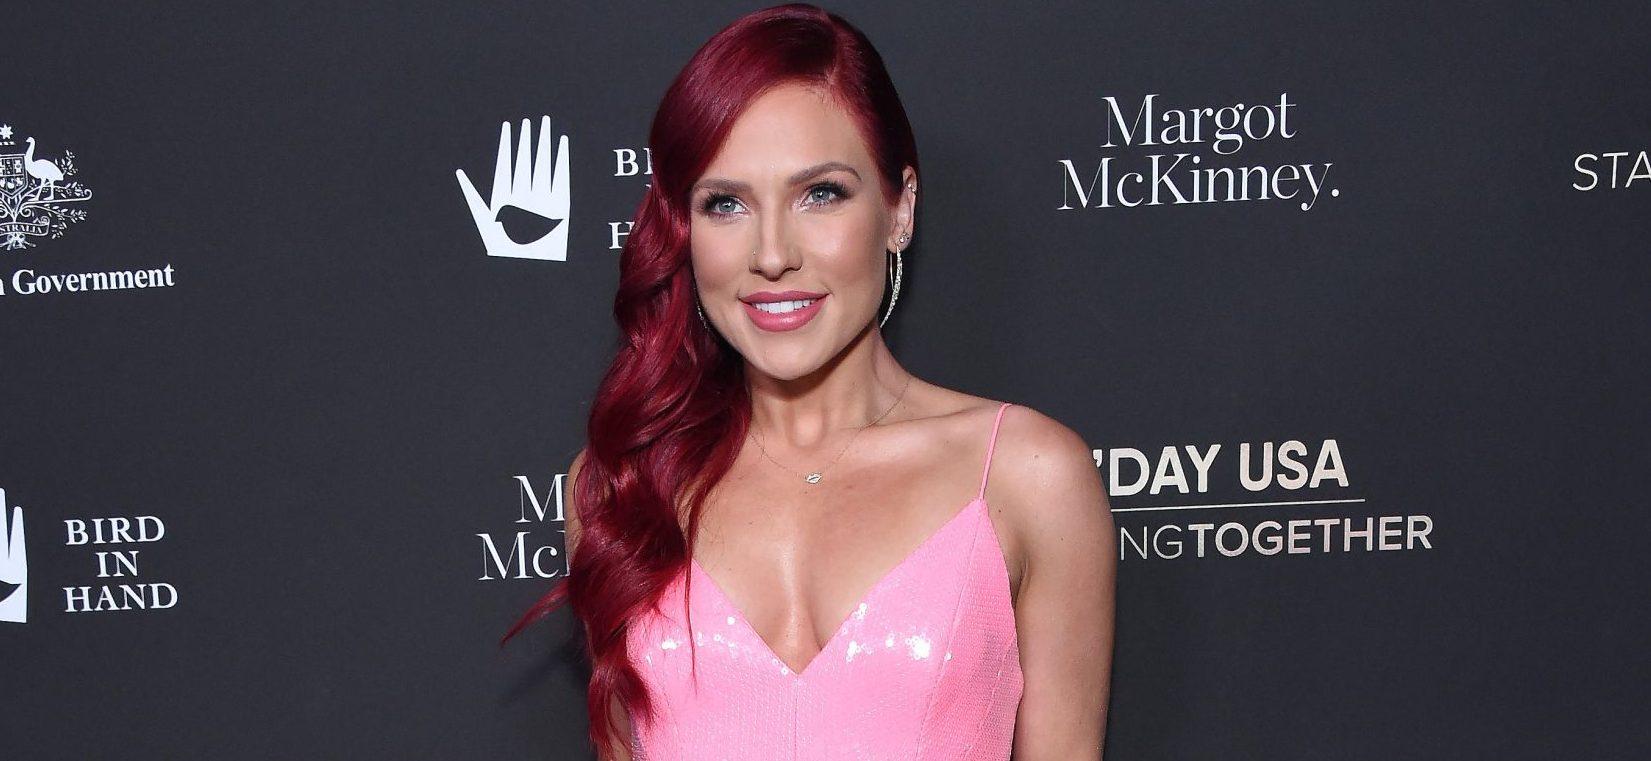 Sharna Burgess Gets Emotional About Finally Living In The Same Country With Mom After Decades